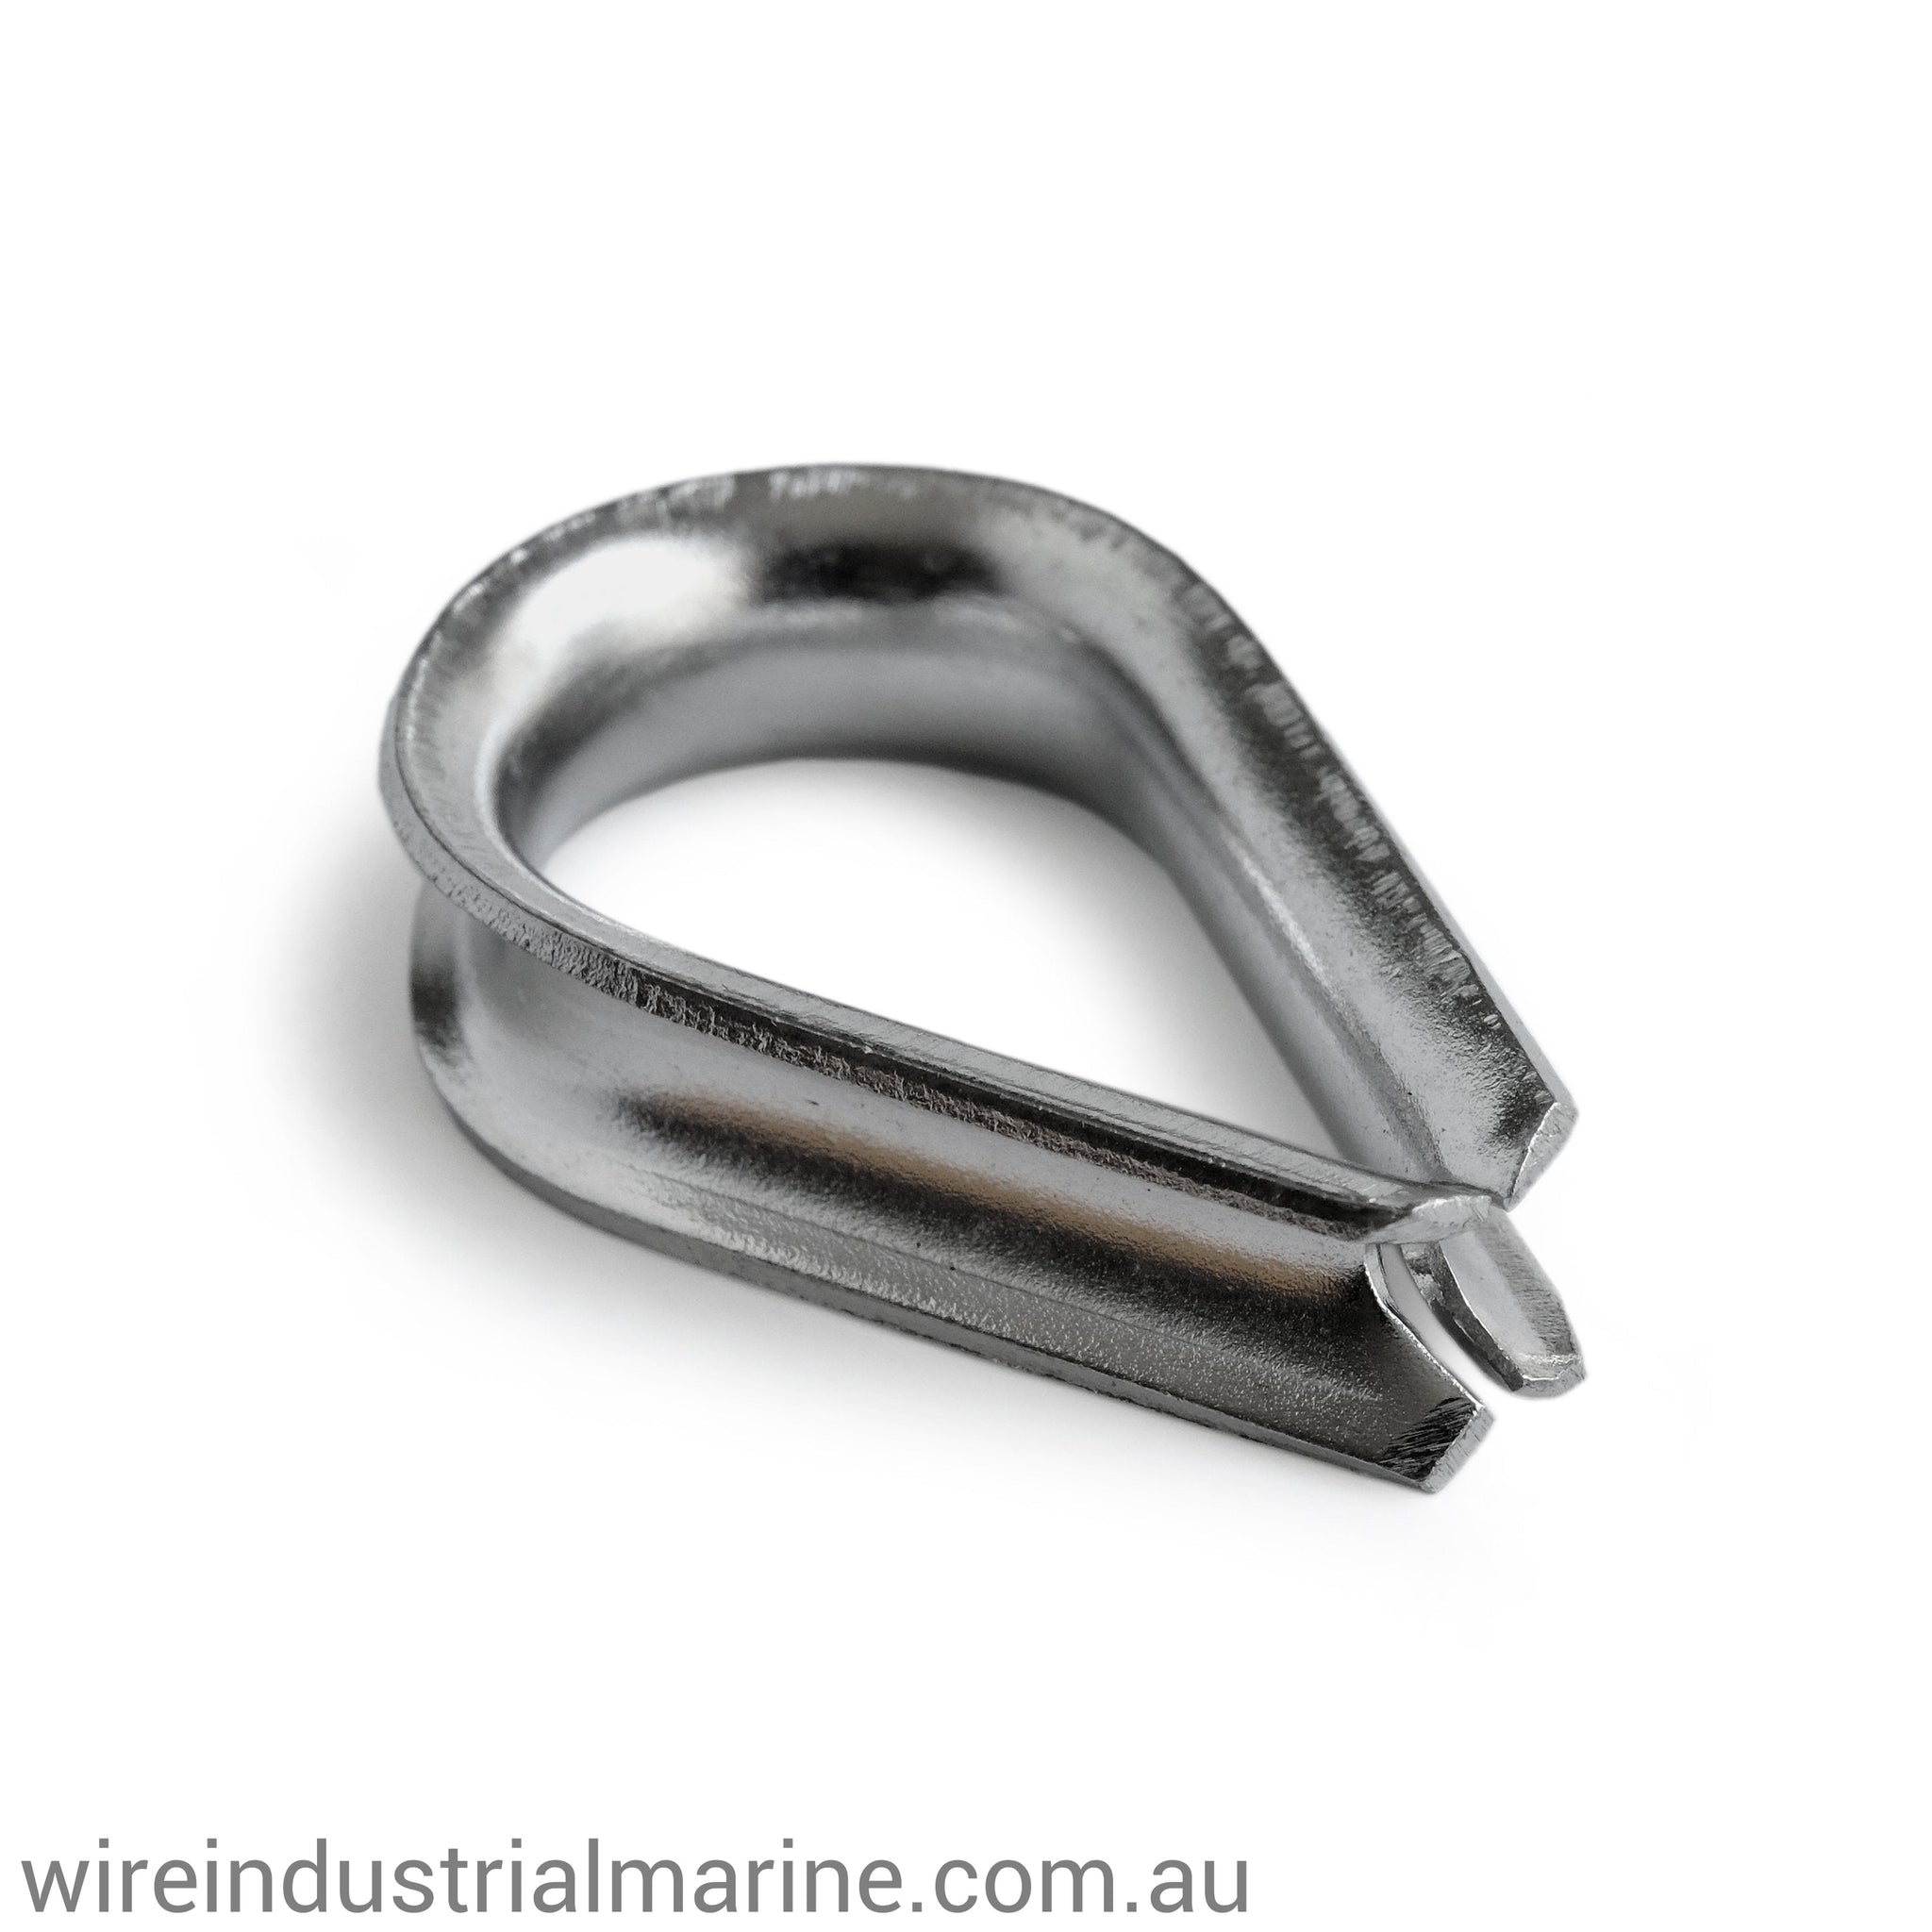 6mm Stainless steel thimbles-Rigging and accessories-wireindustrialmarine